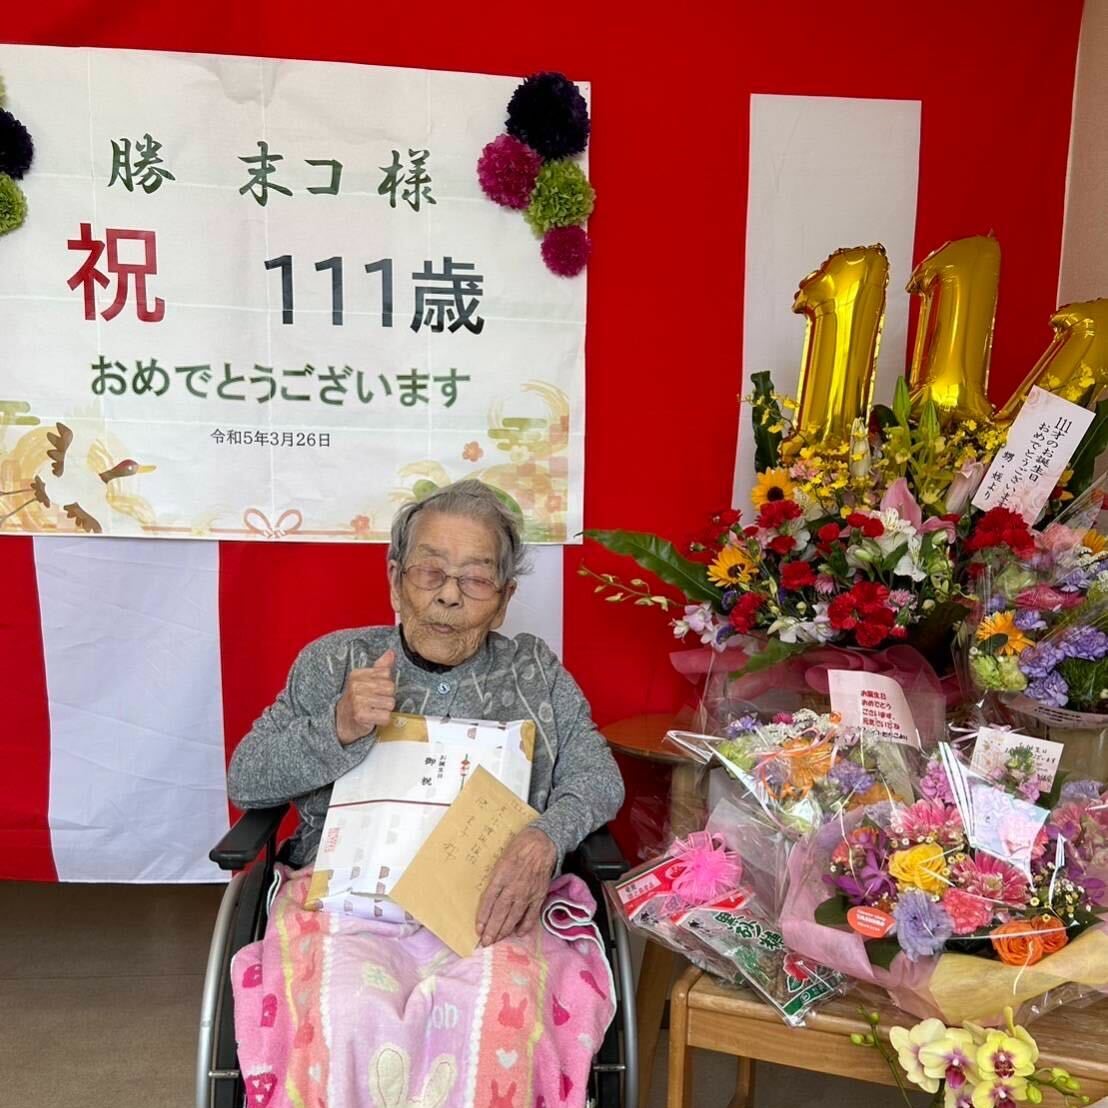 On her 111th birthday. (Source: Courtesy of the family)